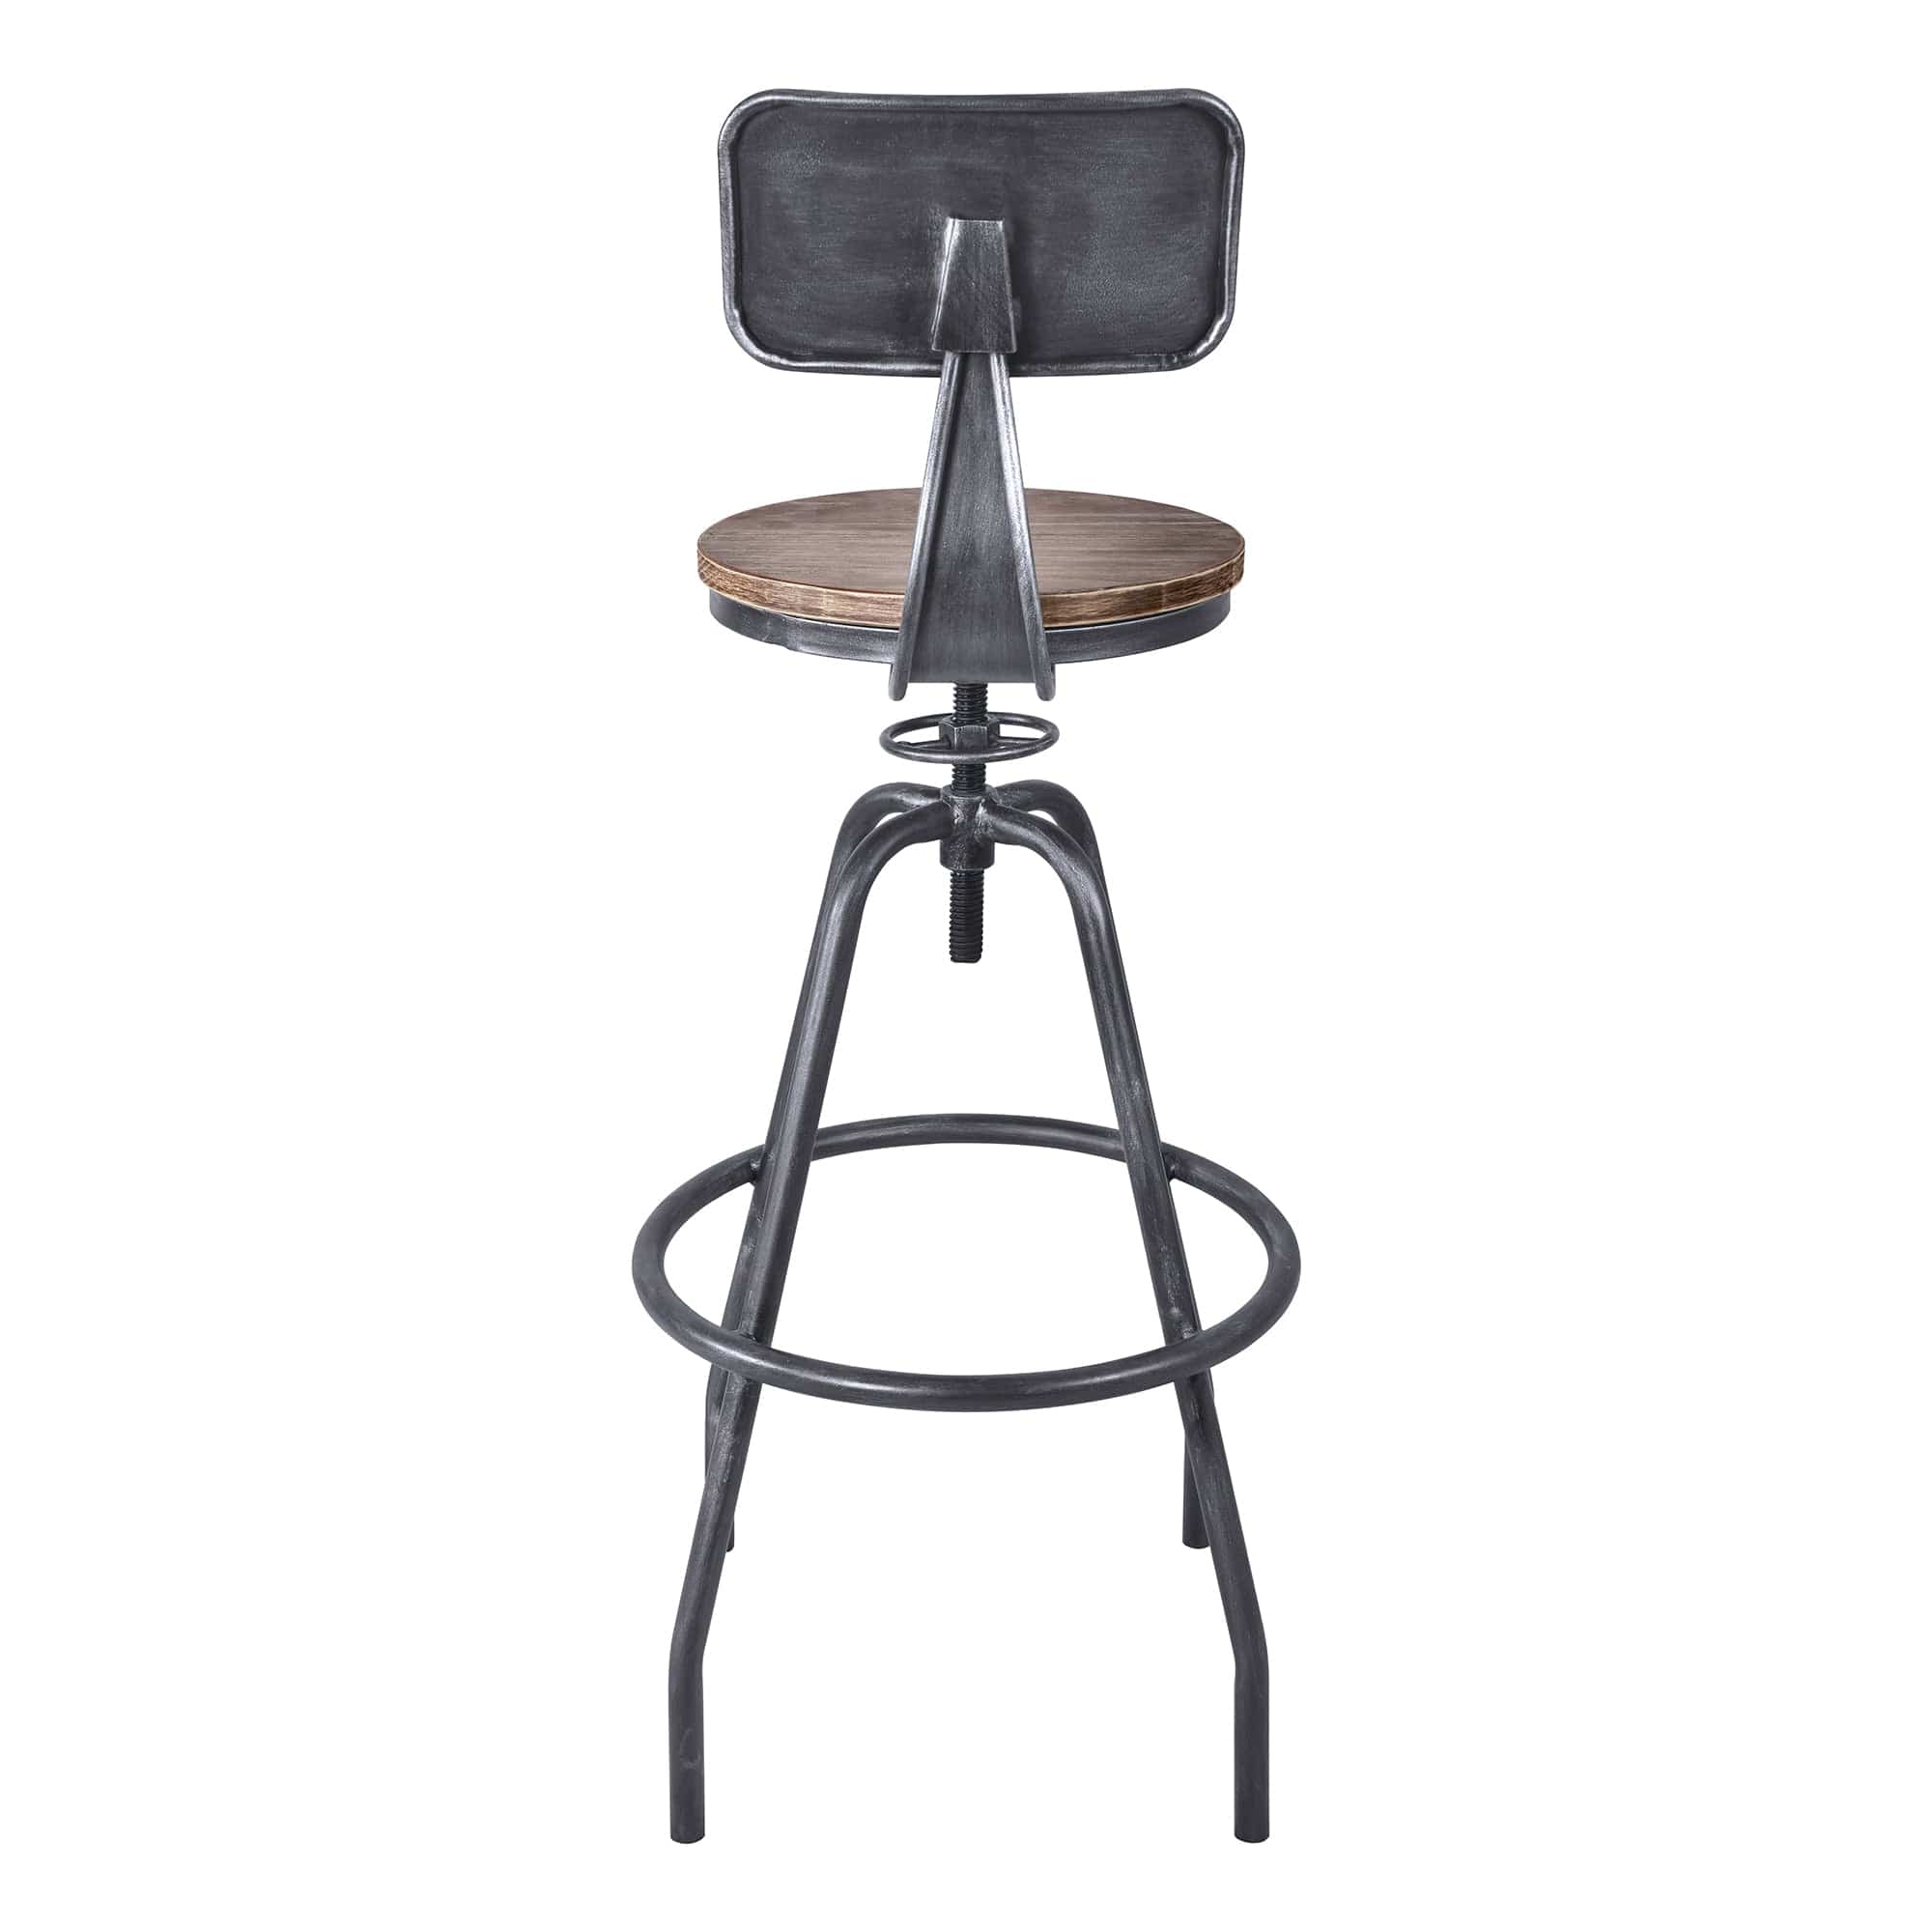 Armen Living Barstool Armen Living - Perlo Industrial Adjustable Barstool in Industrial Gray and Pine Wood | LCPESTSBPI